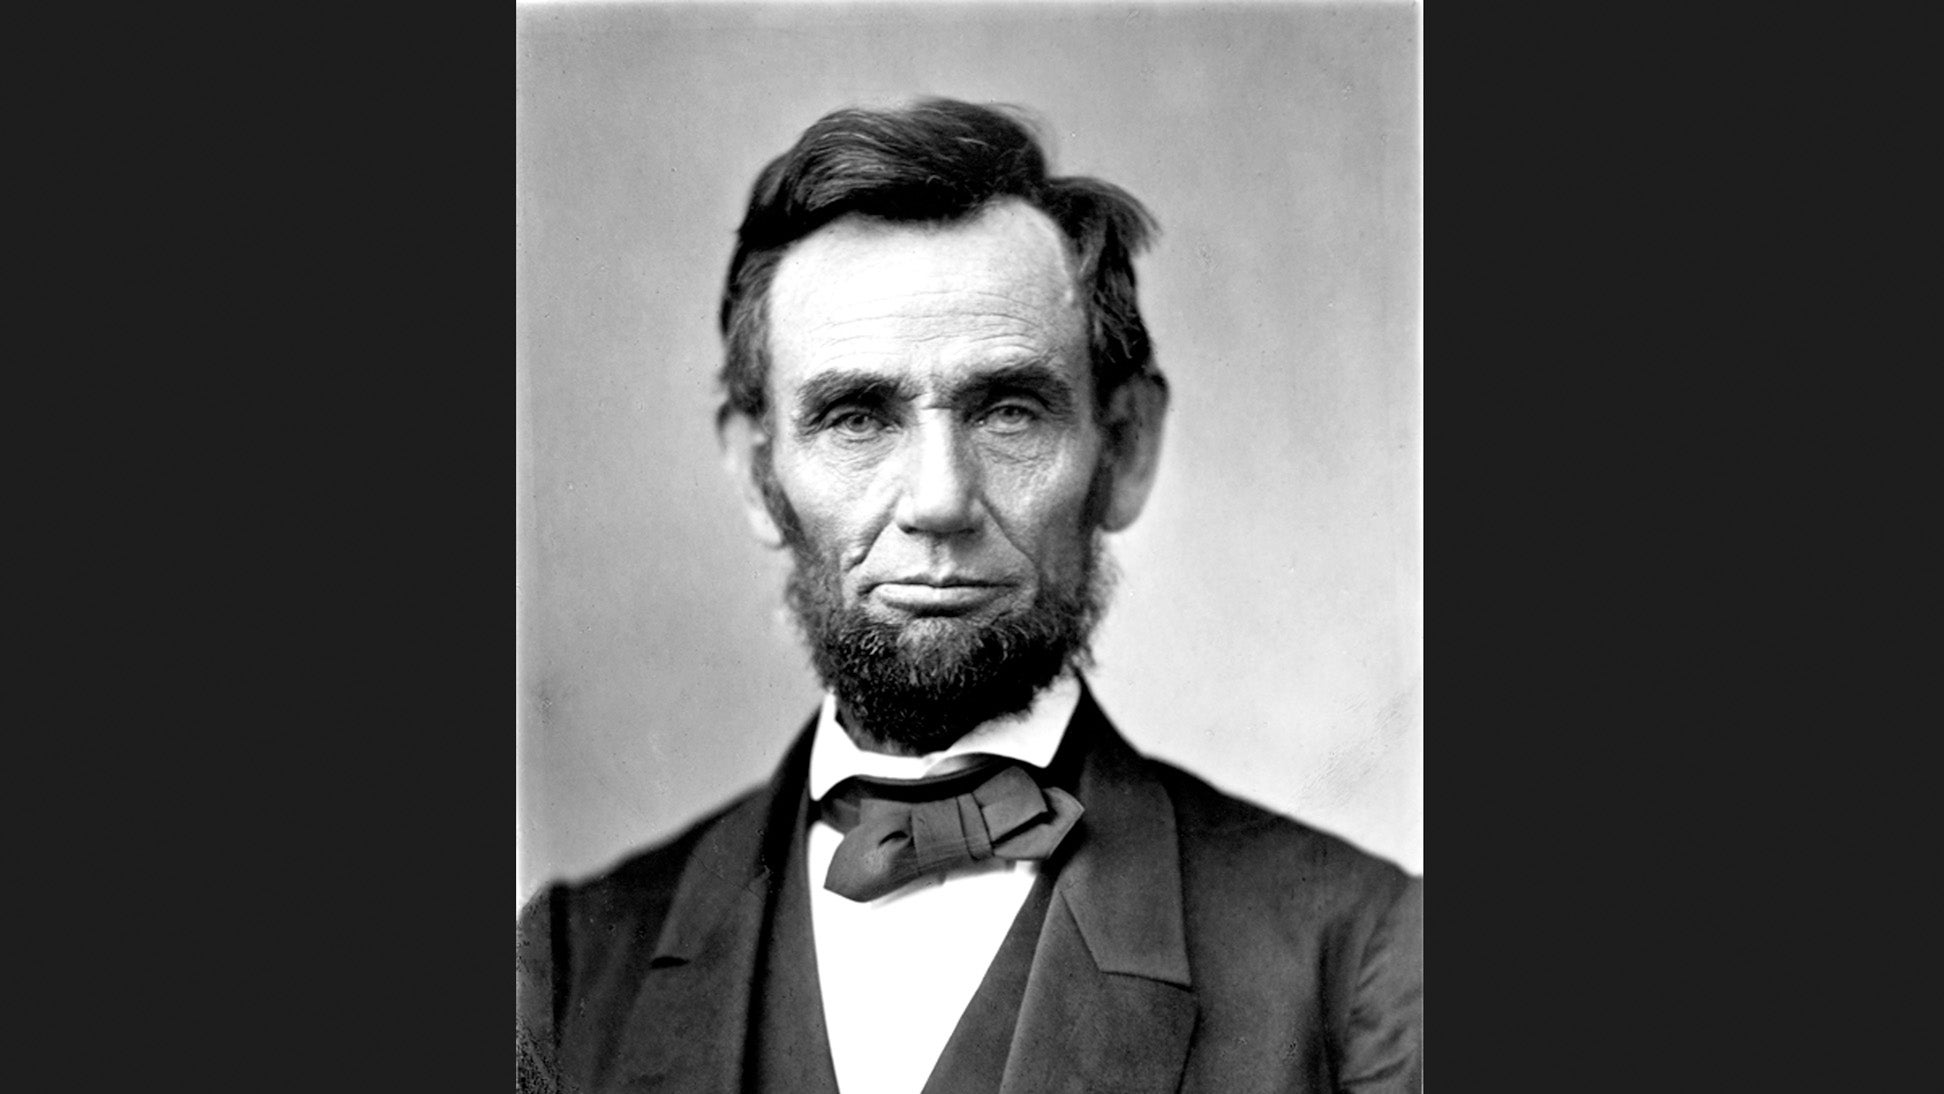 abraham lincoln as a young man